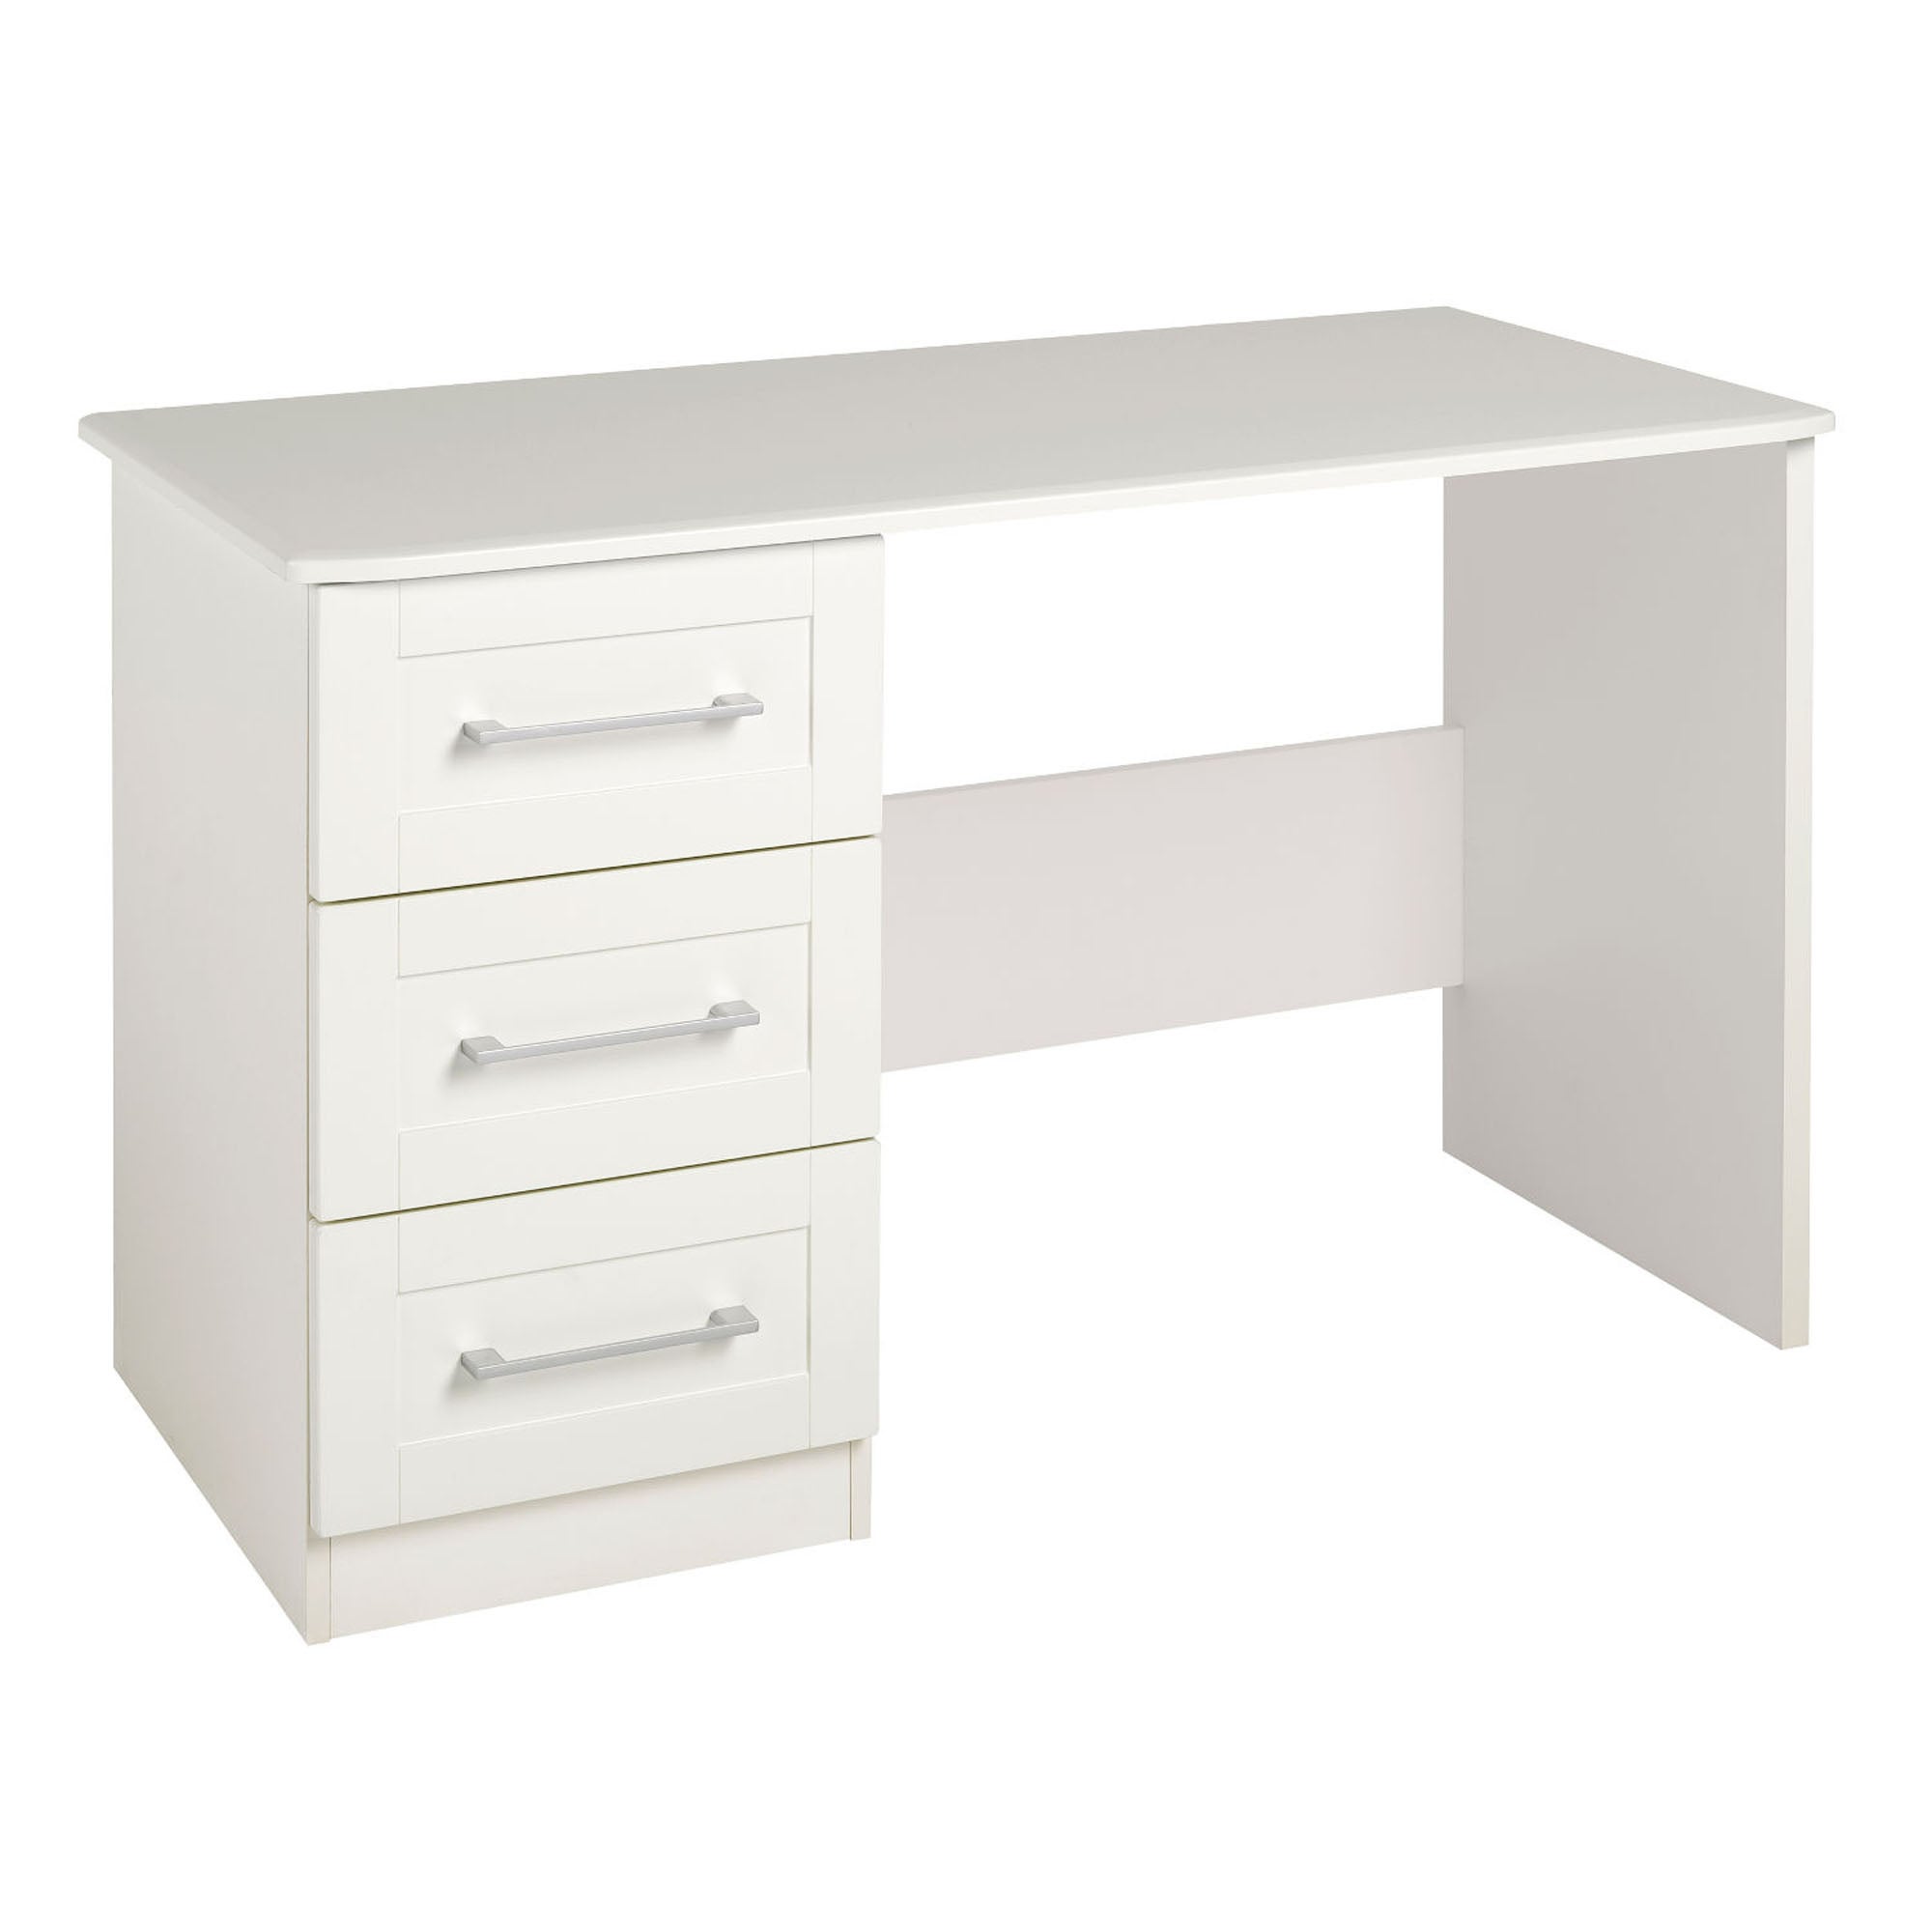 Dressing Tables | Mirrored & Oak Dressing Tables | Dunelm - Page 2